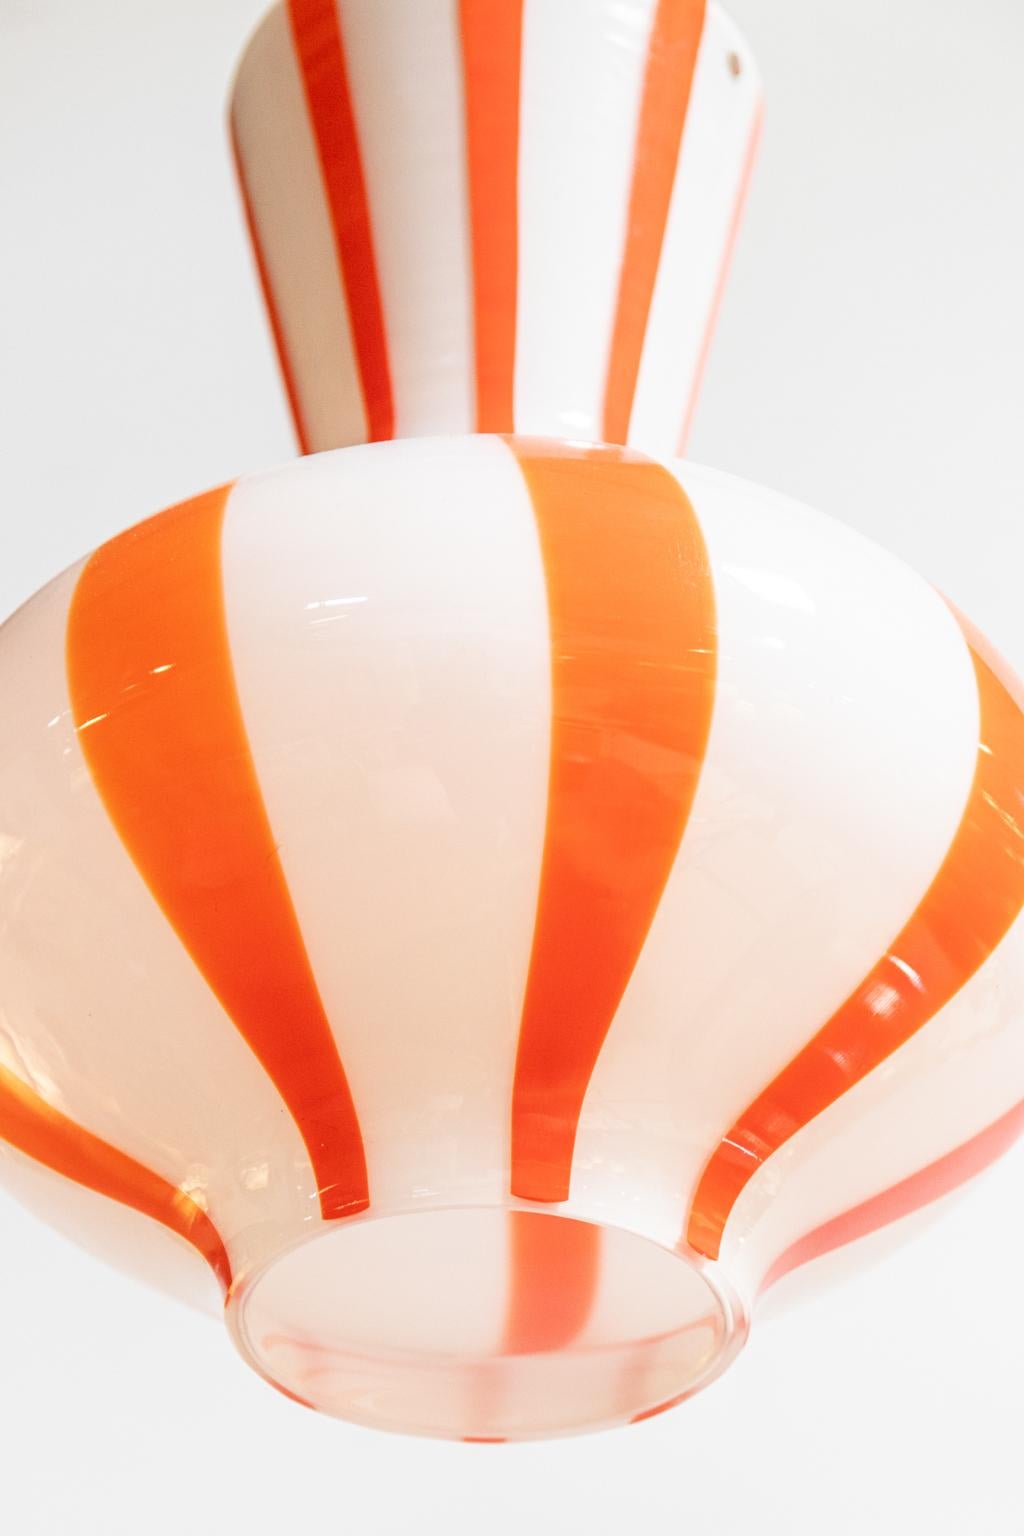 circa 1950s Murano Hanging Glass in Orange and White In Good Condition For Sale In Stamford, CT